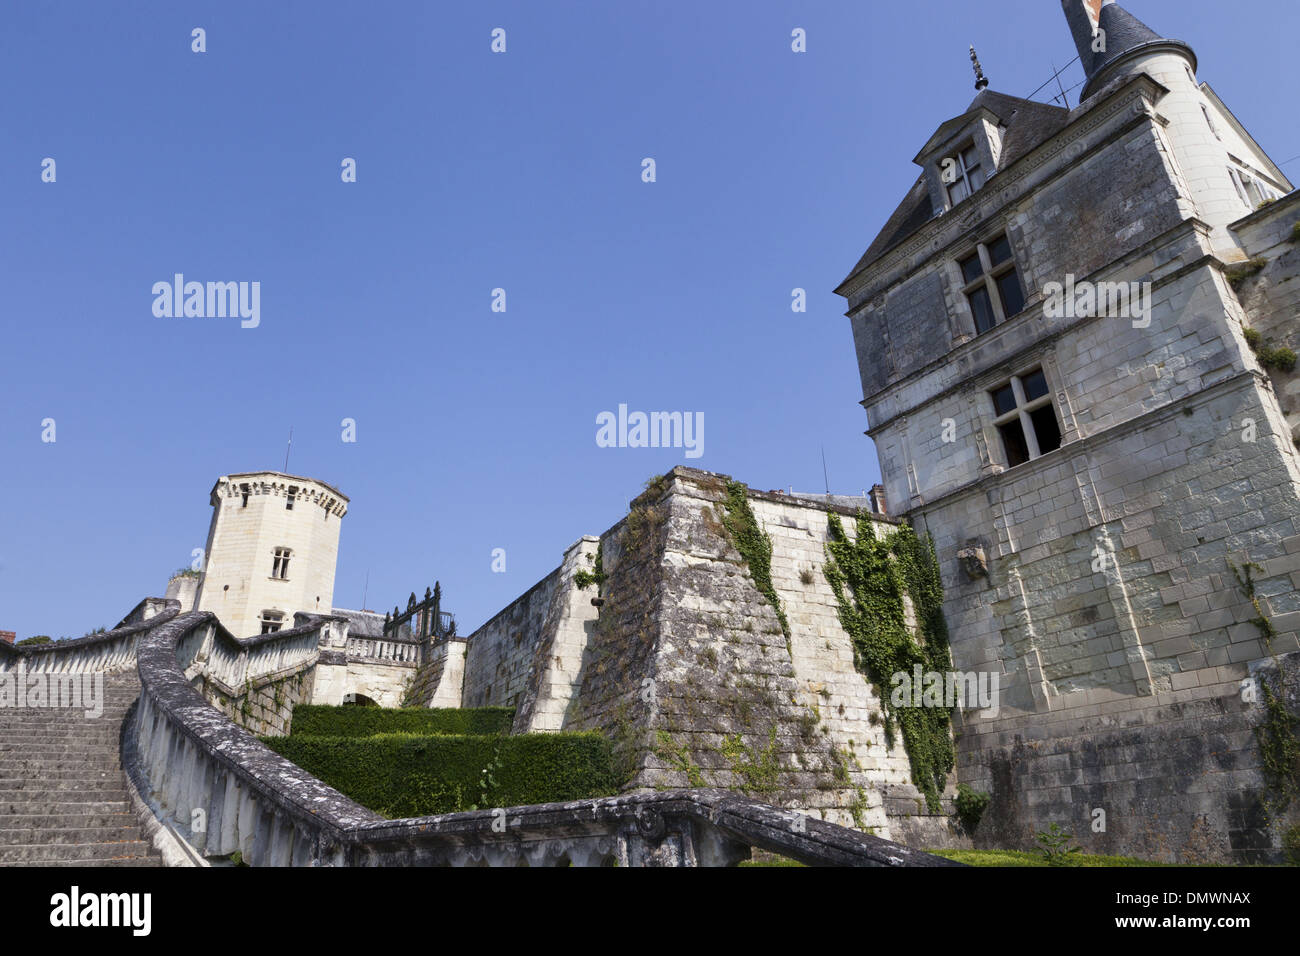 Chateau Saint-Aignan at the top of the town, view from the steps leading up Stock Photo